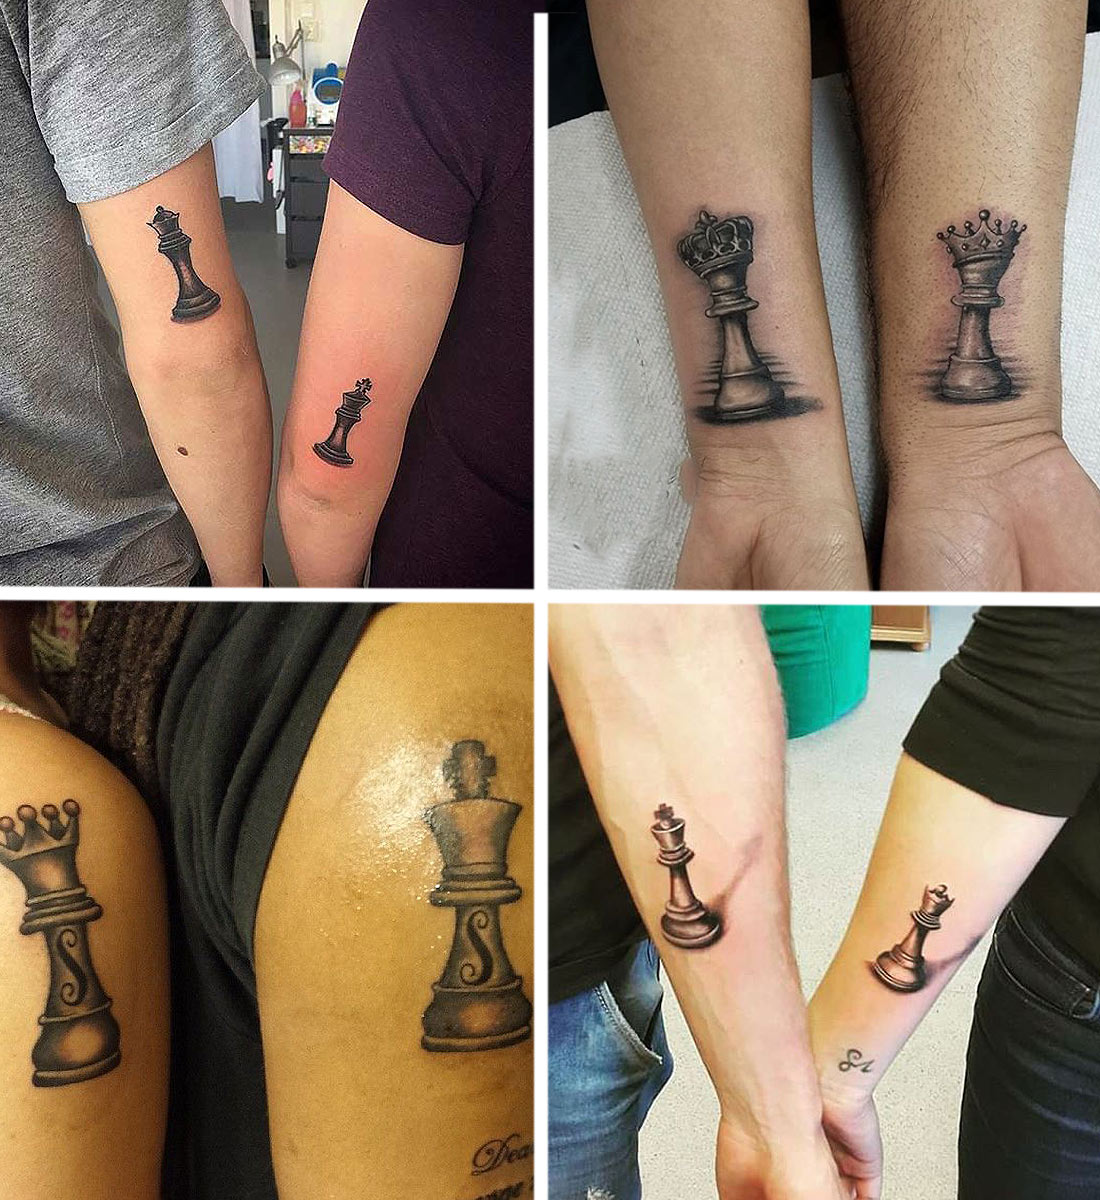 Crown tattoo queen and king | Tattoos, Forarm tattoos, Couple tattoos